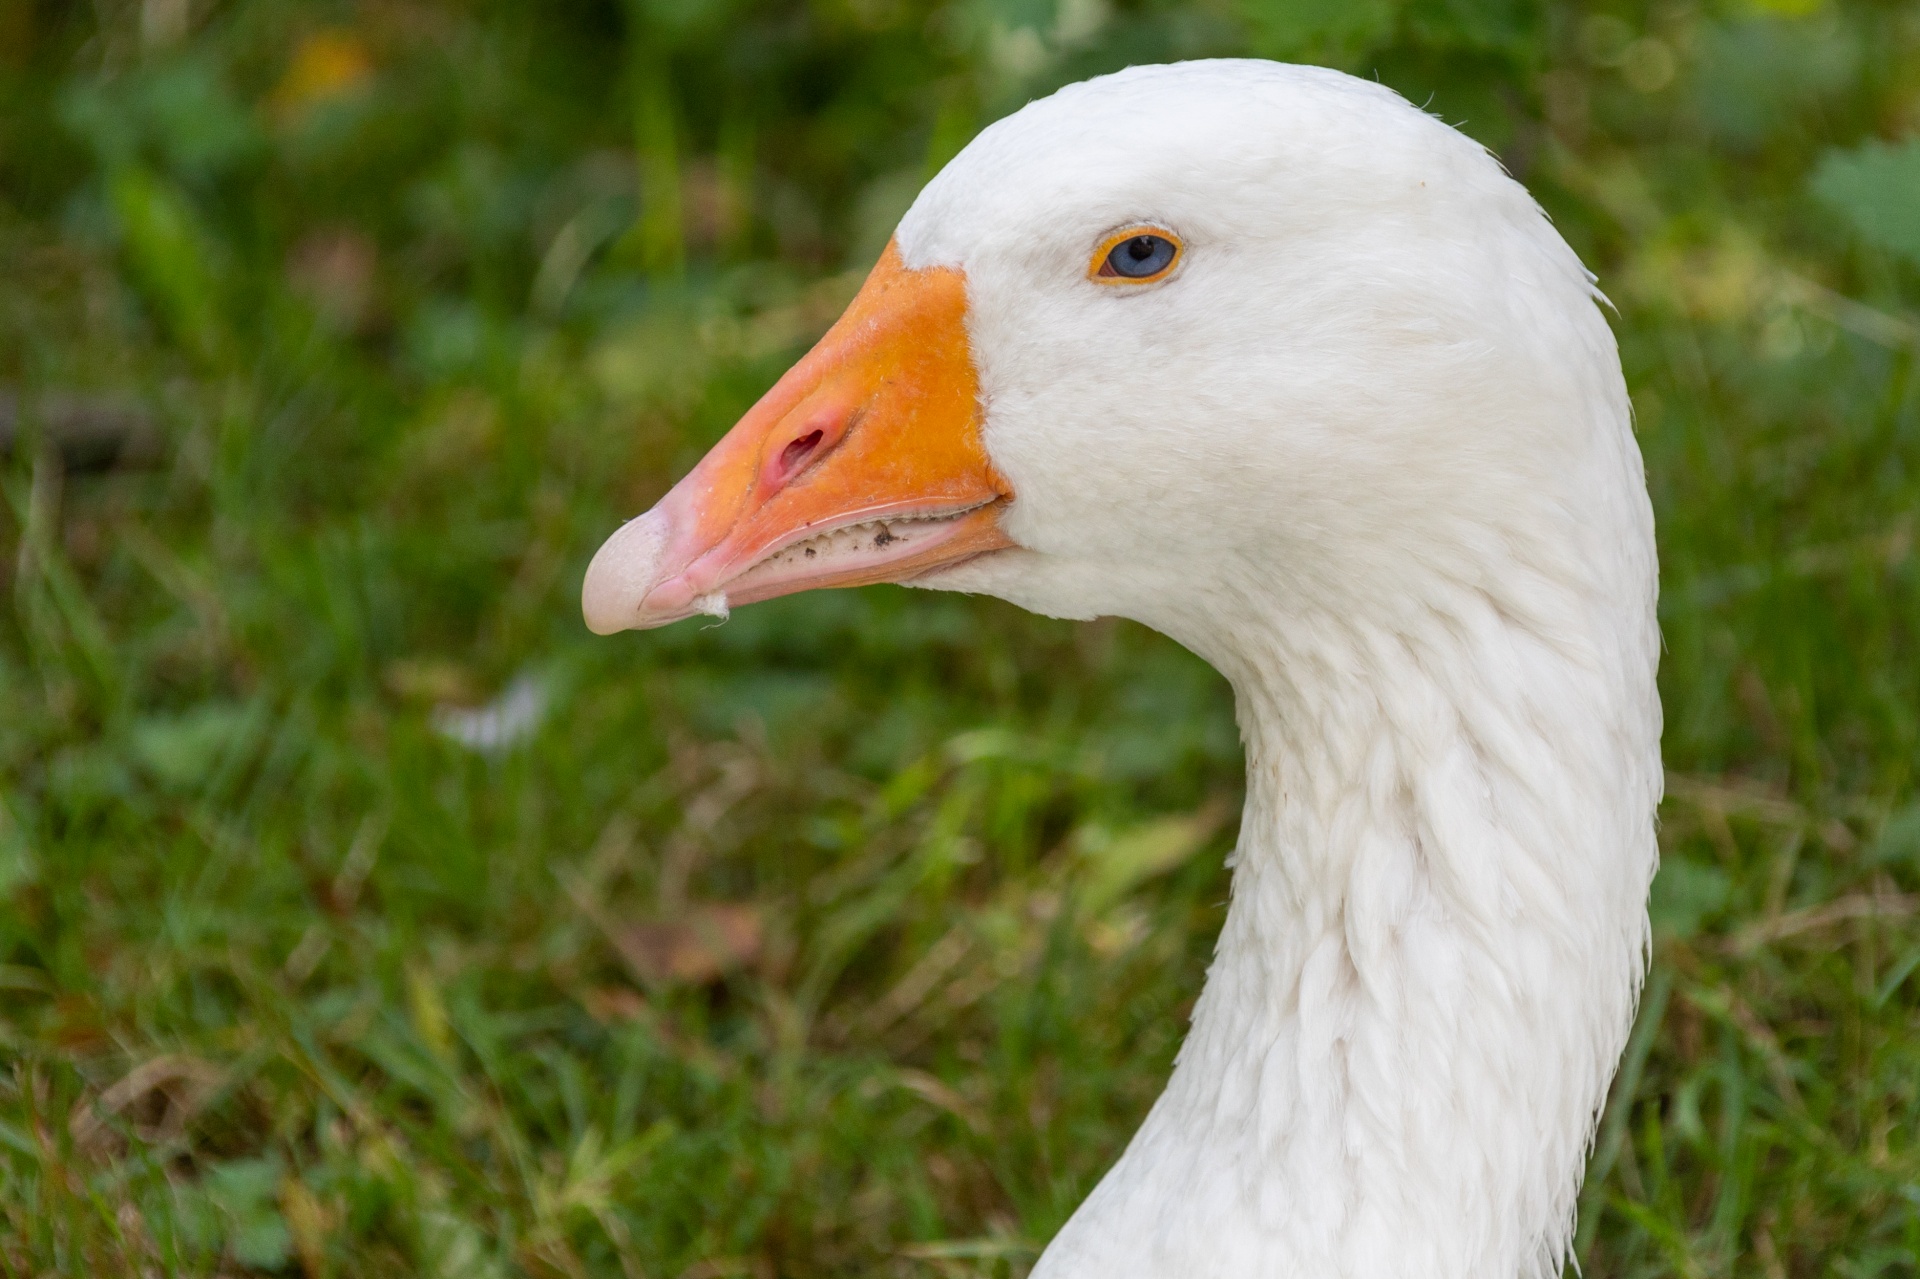 White goose portrait with green grass in the background